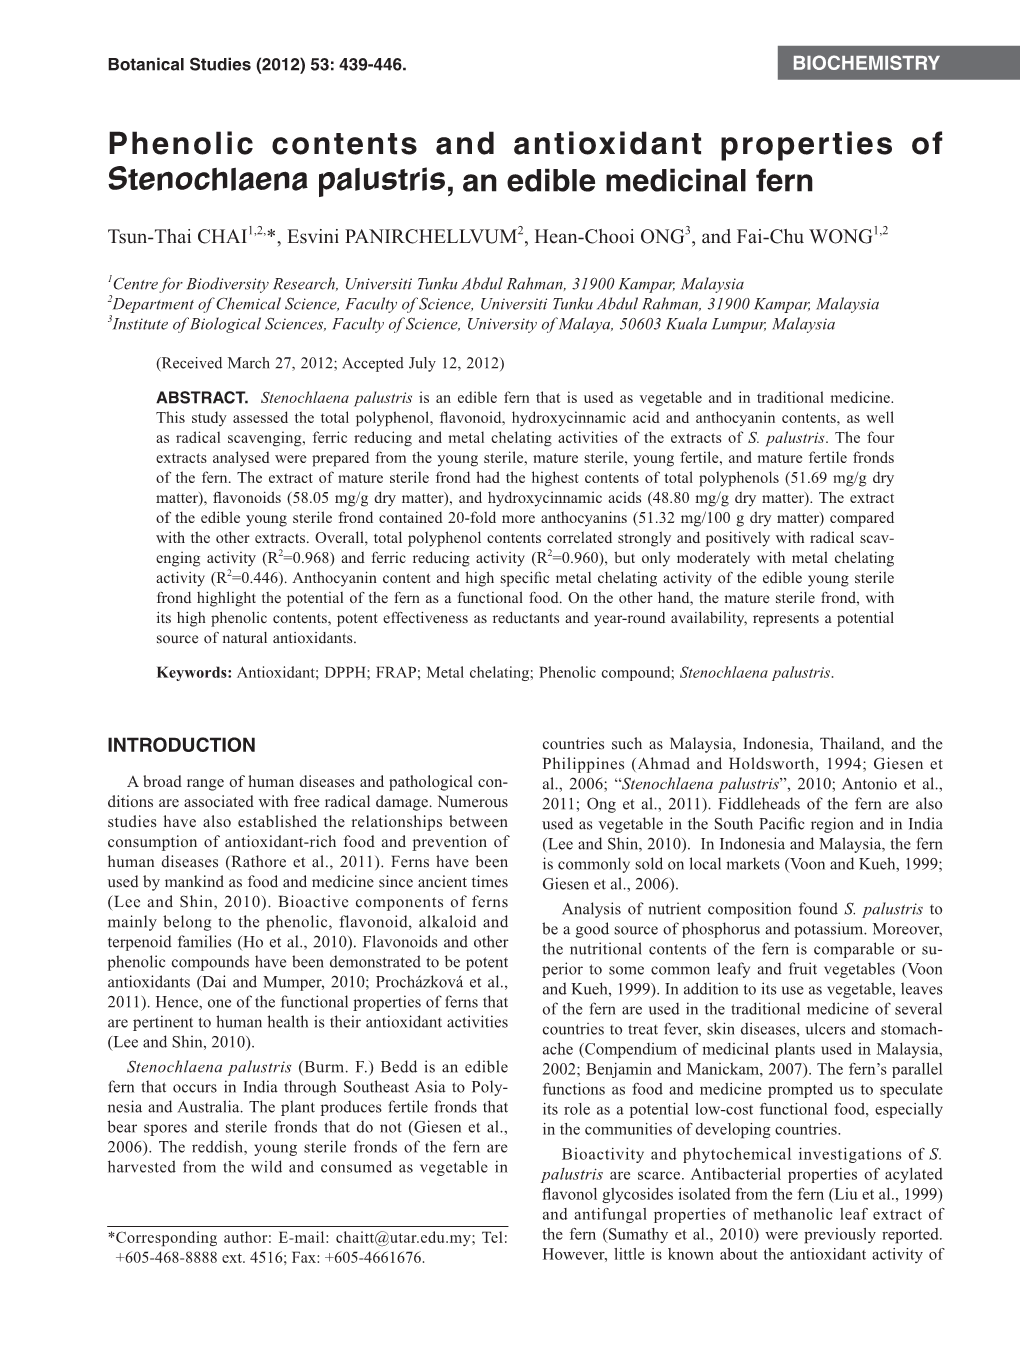 Phenolic Contents and Antioxidant Properties of Stenochlaena Palustris, an Edible Medicinal Fern